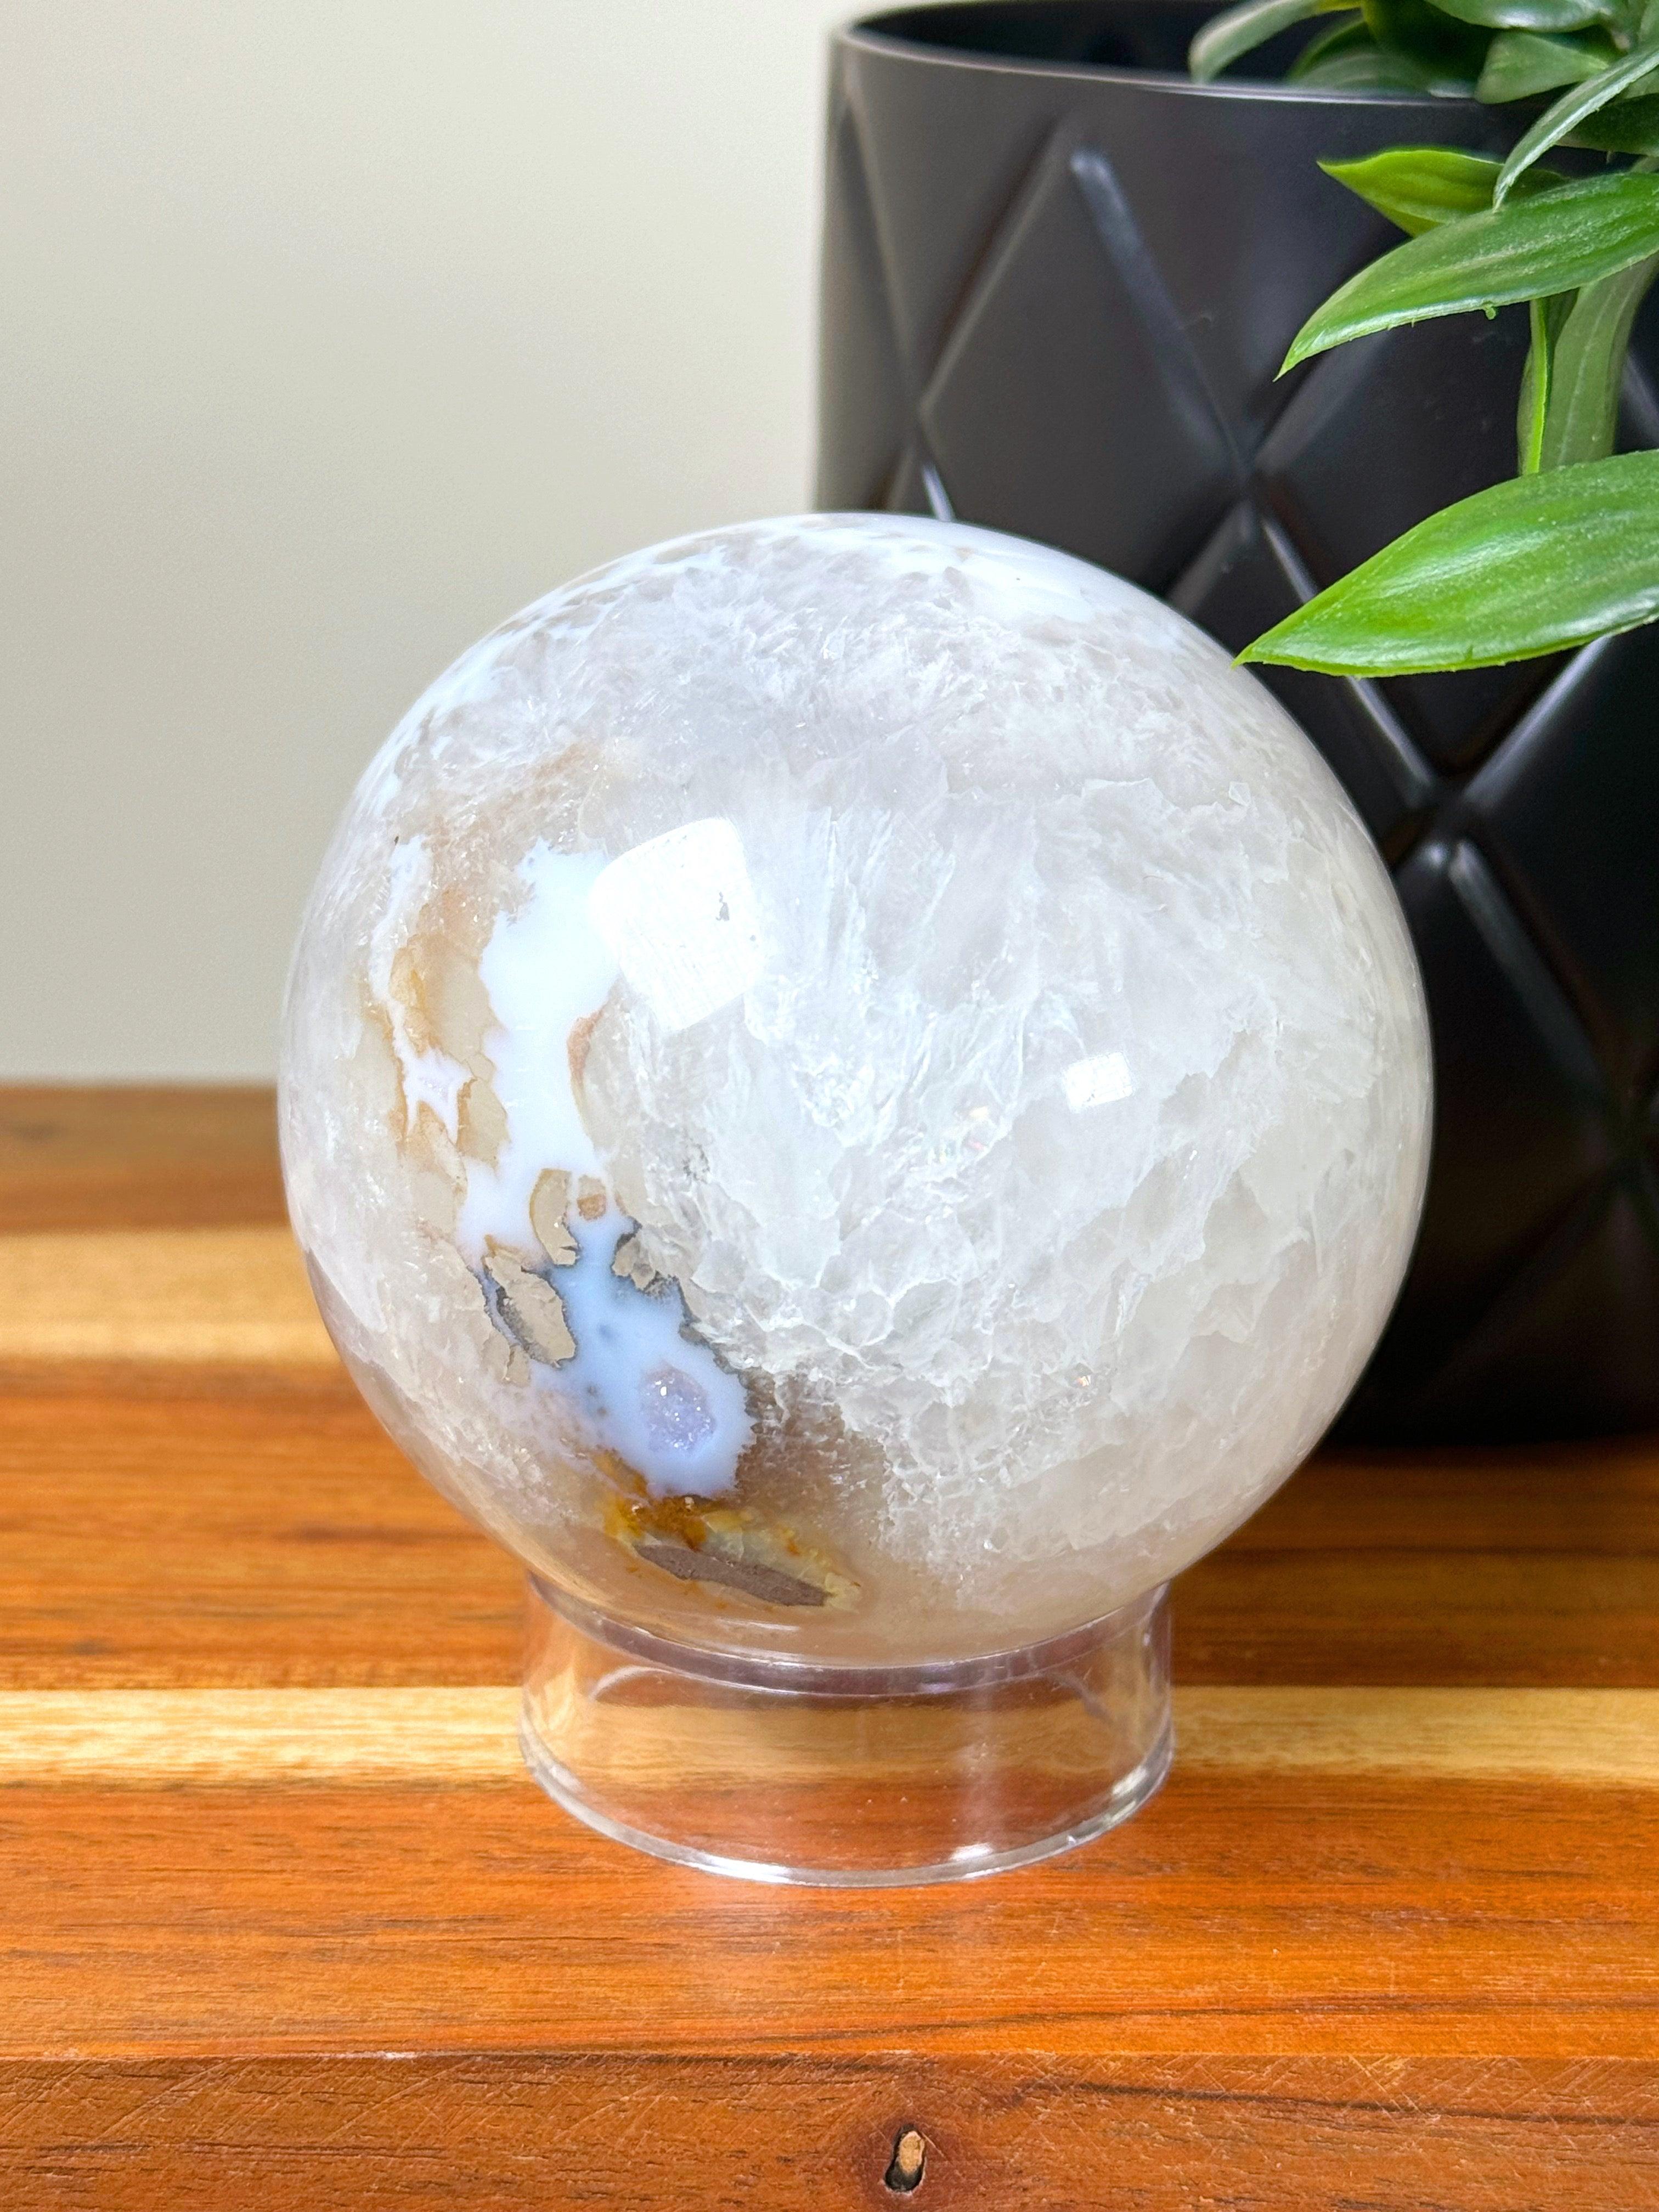 DRUZY AGATE SPHERE 6 - agate, druzy agate, googly agate, googly eye, googly eye agate, one of a kind, sphere, statement piece - The Mineral Maven